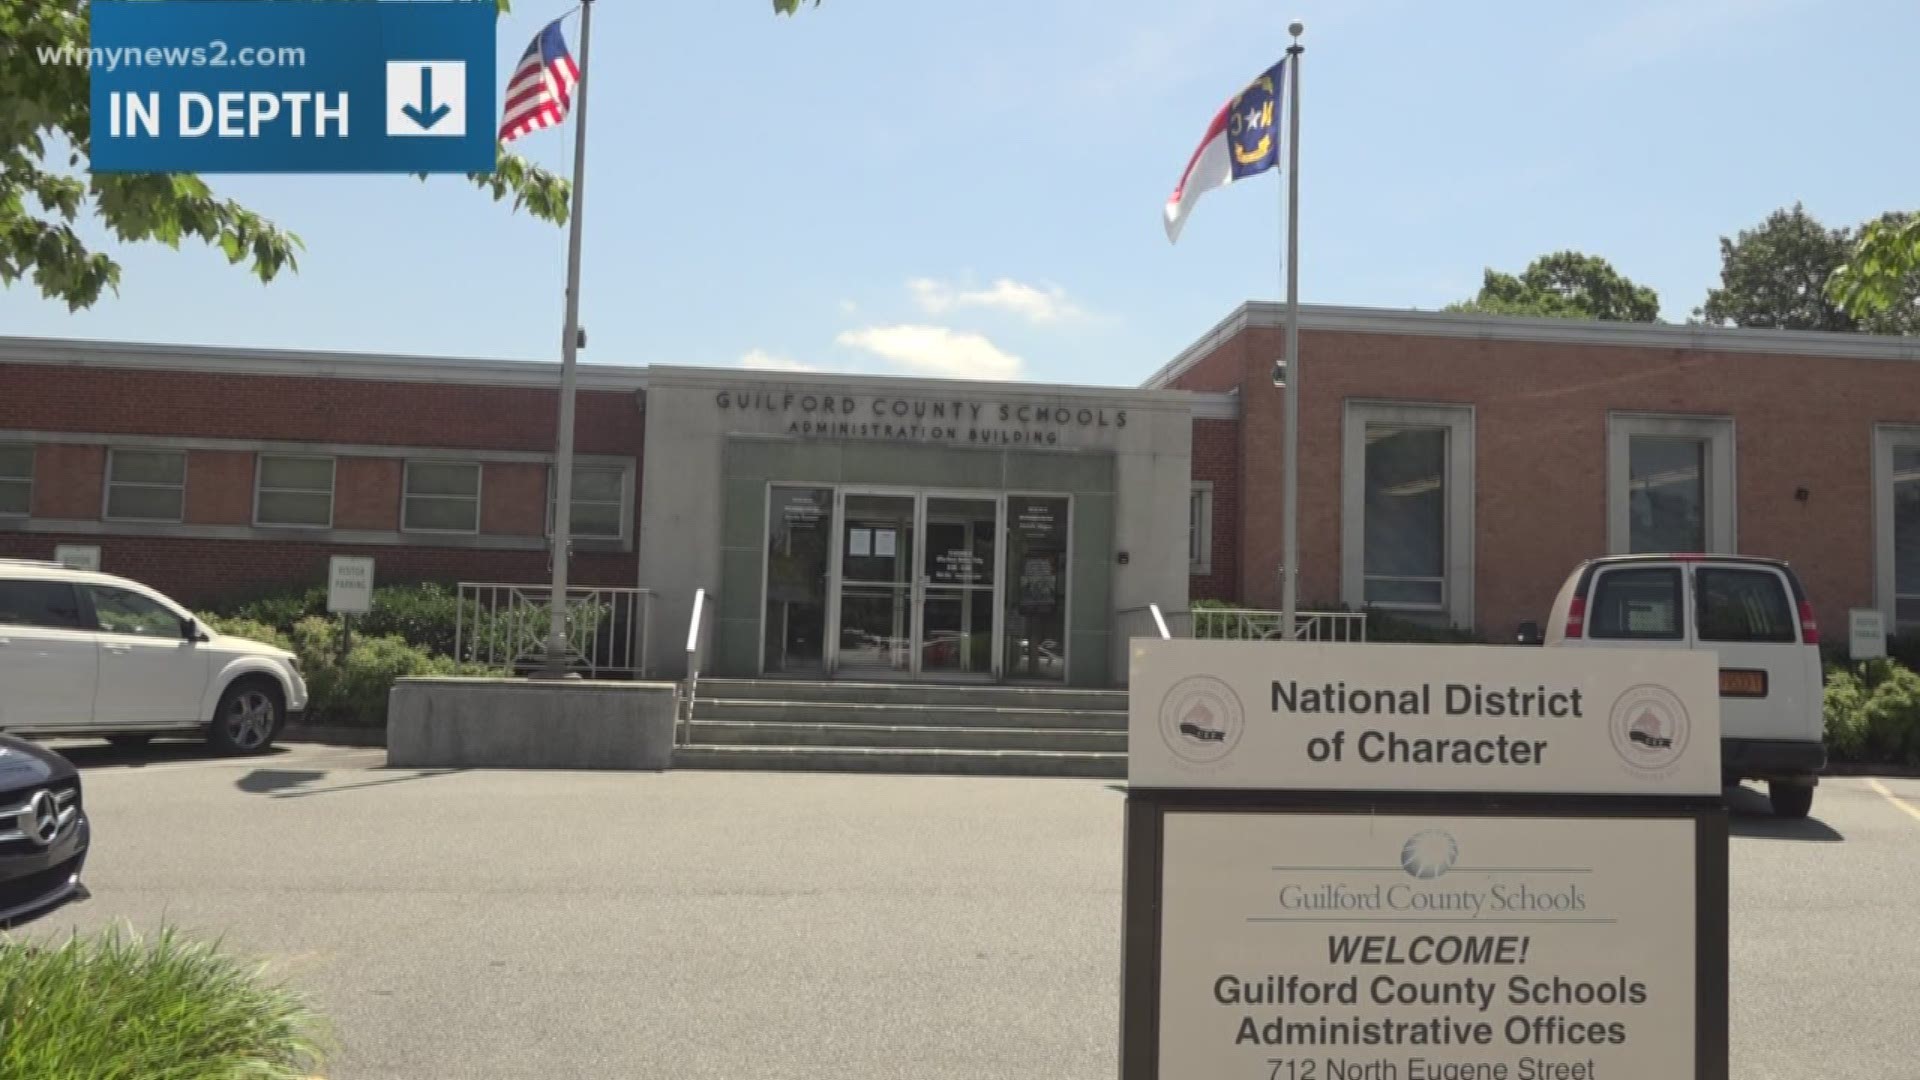 According to Guilford County school officials, cuts to the budget means no teacher supplement increase, no bus driver pay raise, and the likelihood of more cuts to school programs.